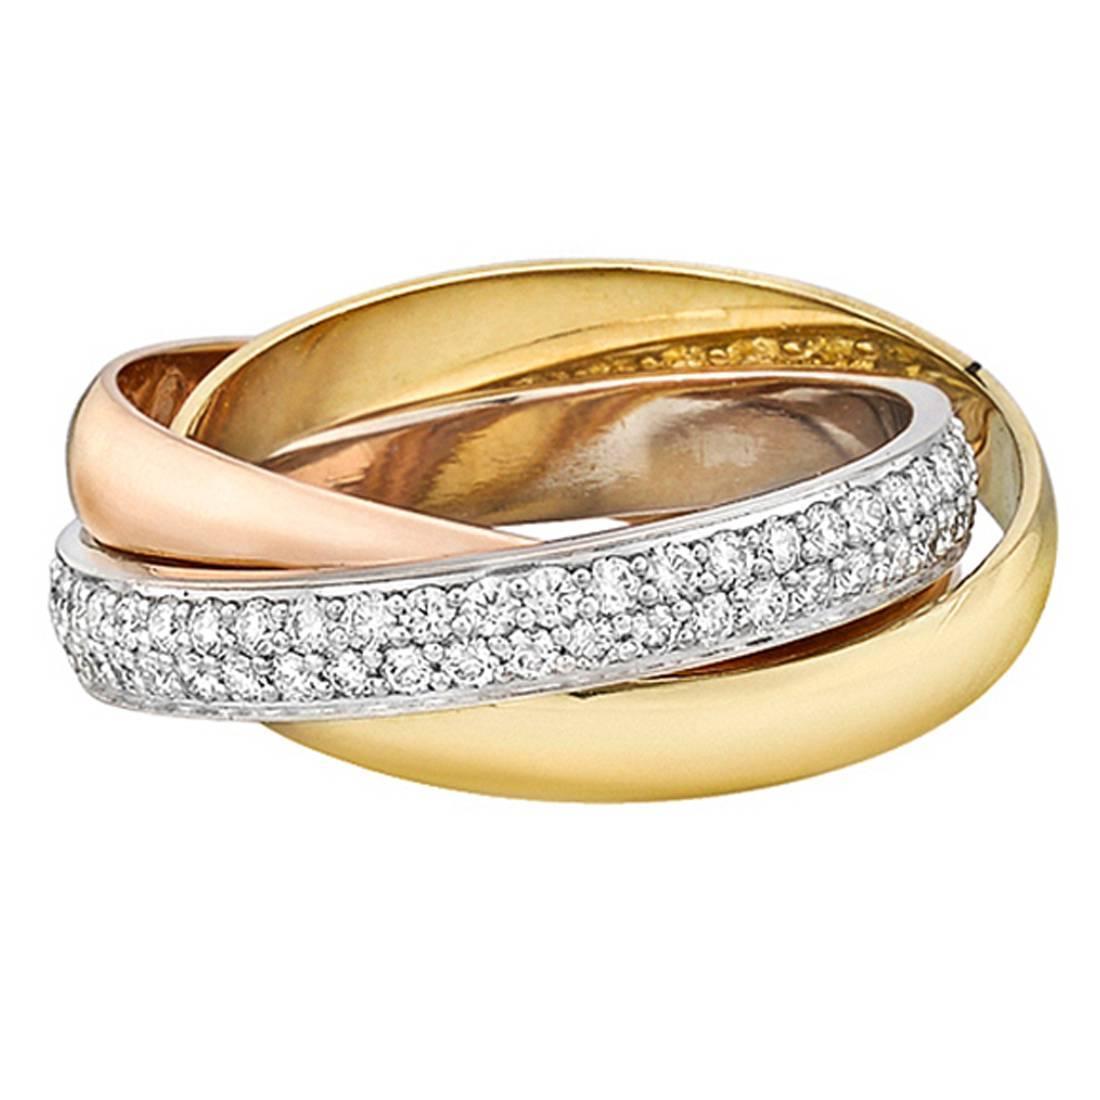 Cartier Small Diamond Tricolored Gold Trinity Ring at 1stdibs